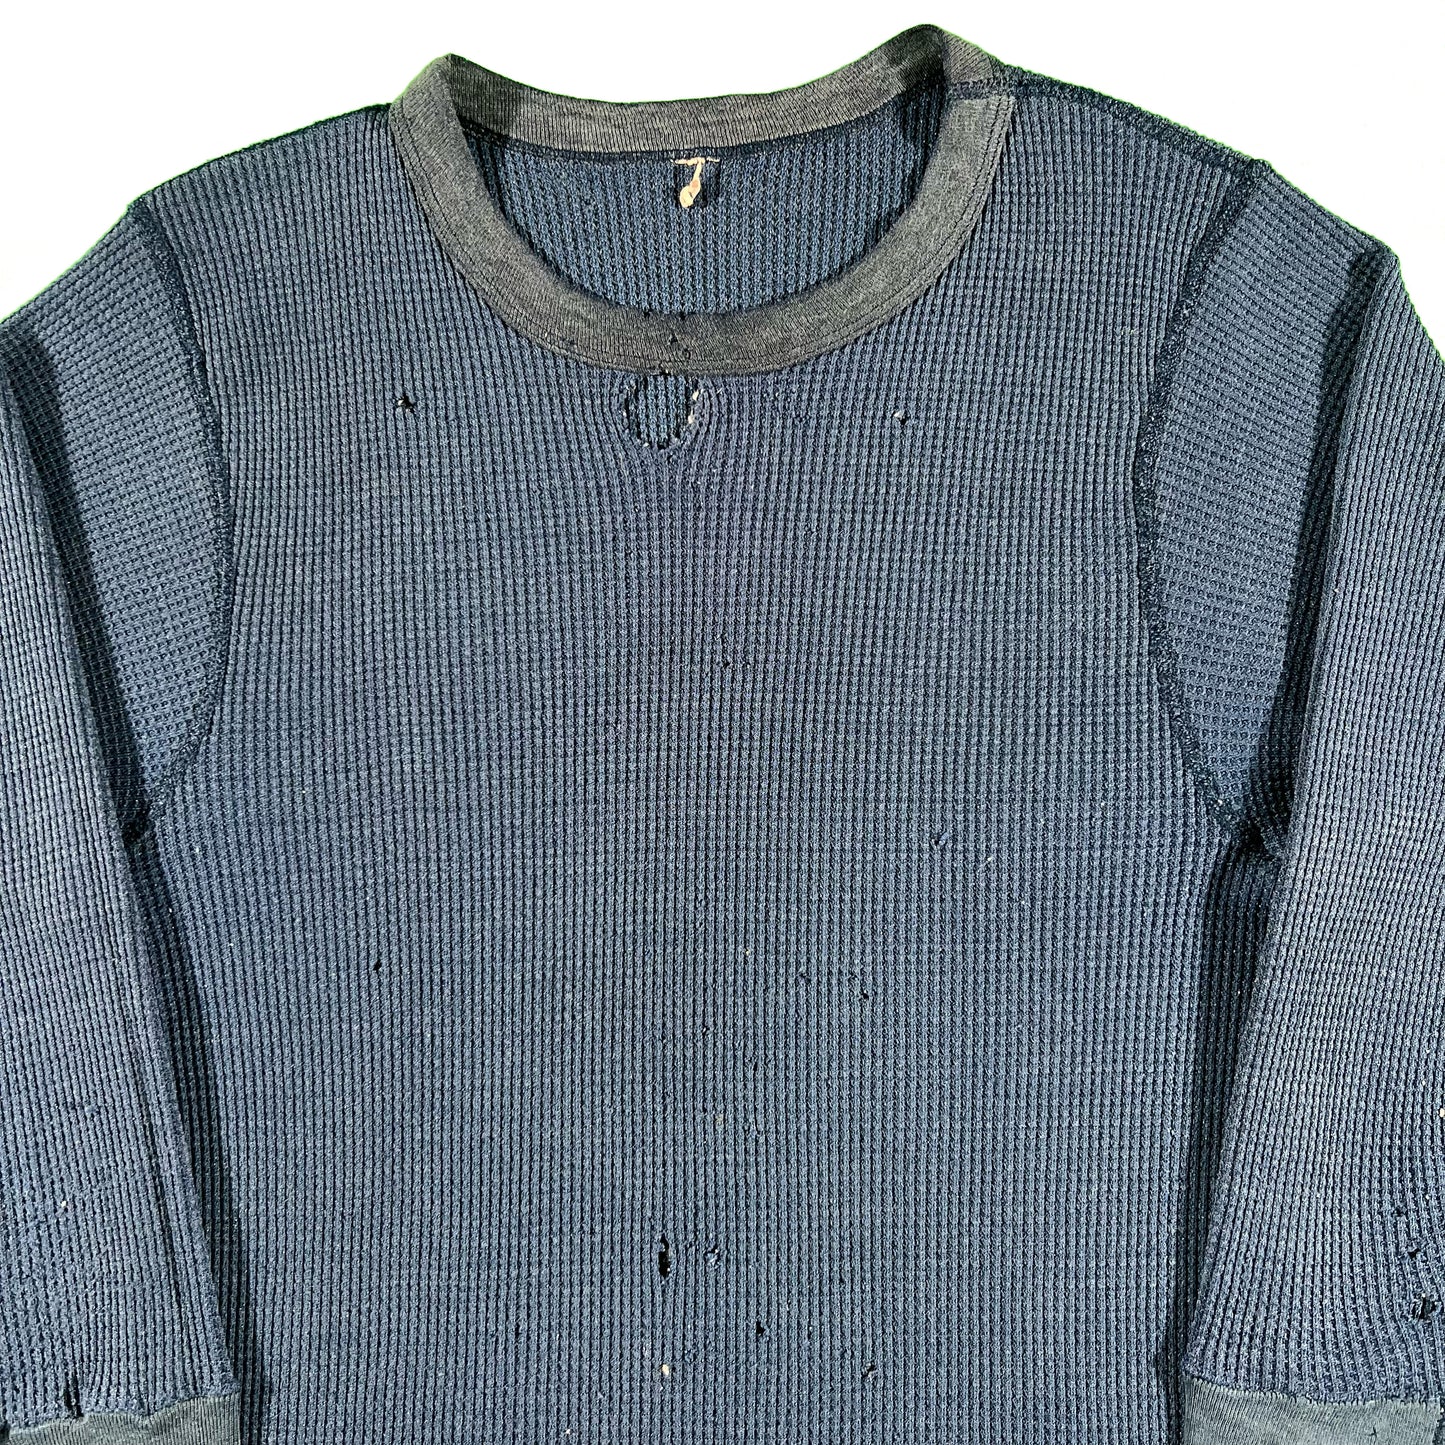 70s Tattered Waffle Knit Thermal- M